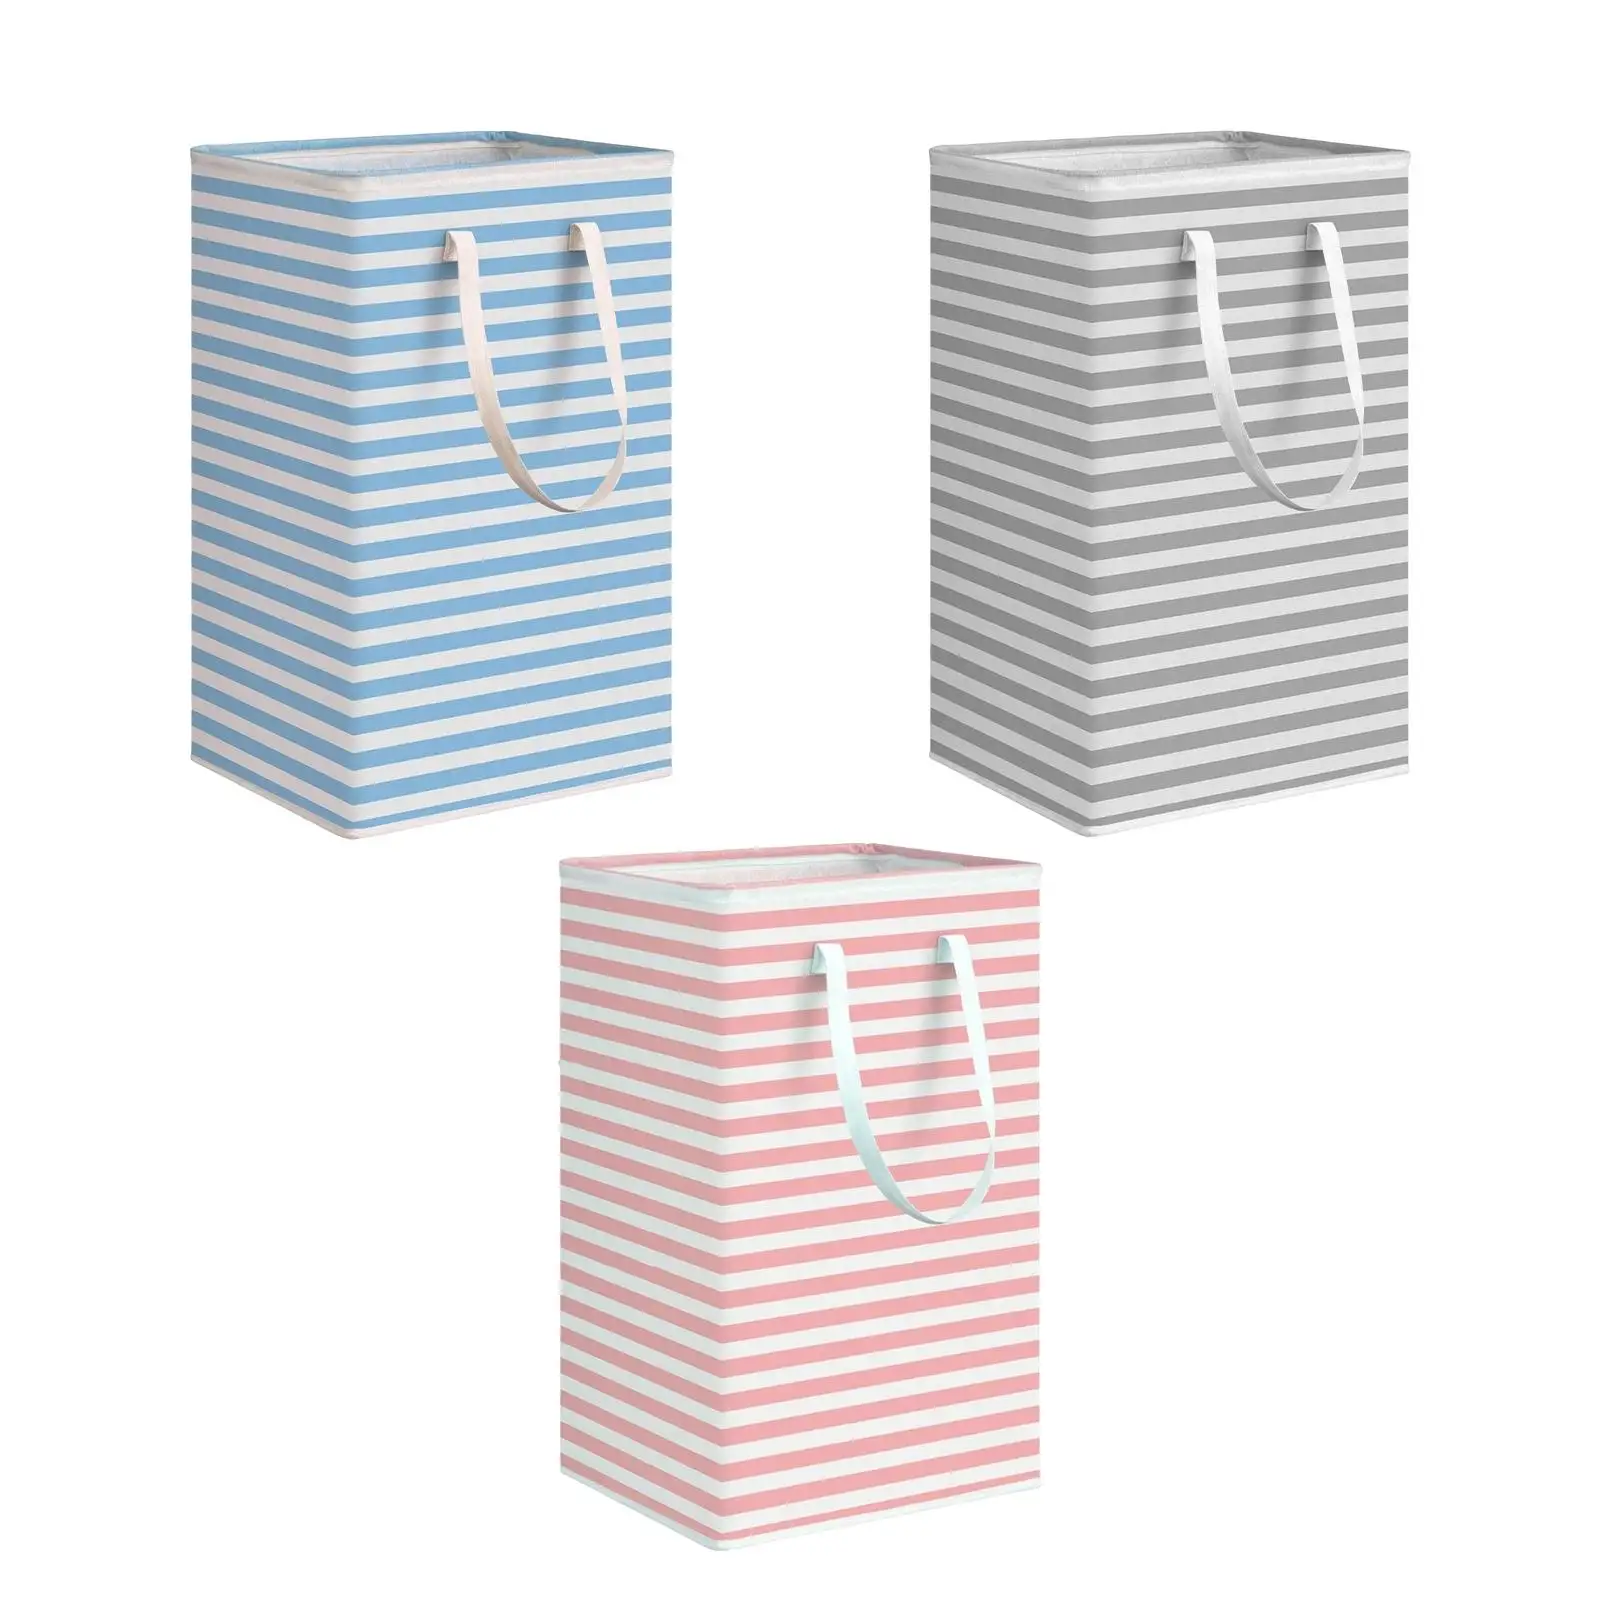 Dirty Clothes Laundry Basket with Easy Carry Handles Washing Bin 75L Collapsible Large Laundry Basket for Utility Room Bedroom